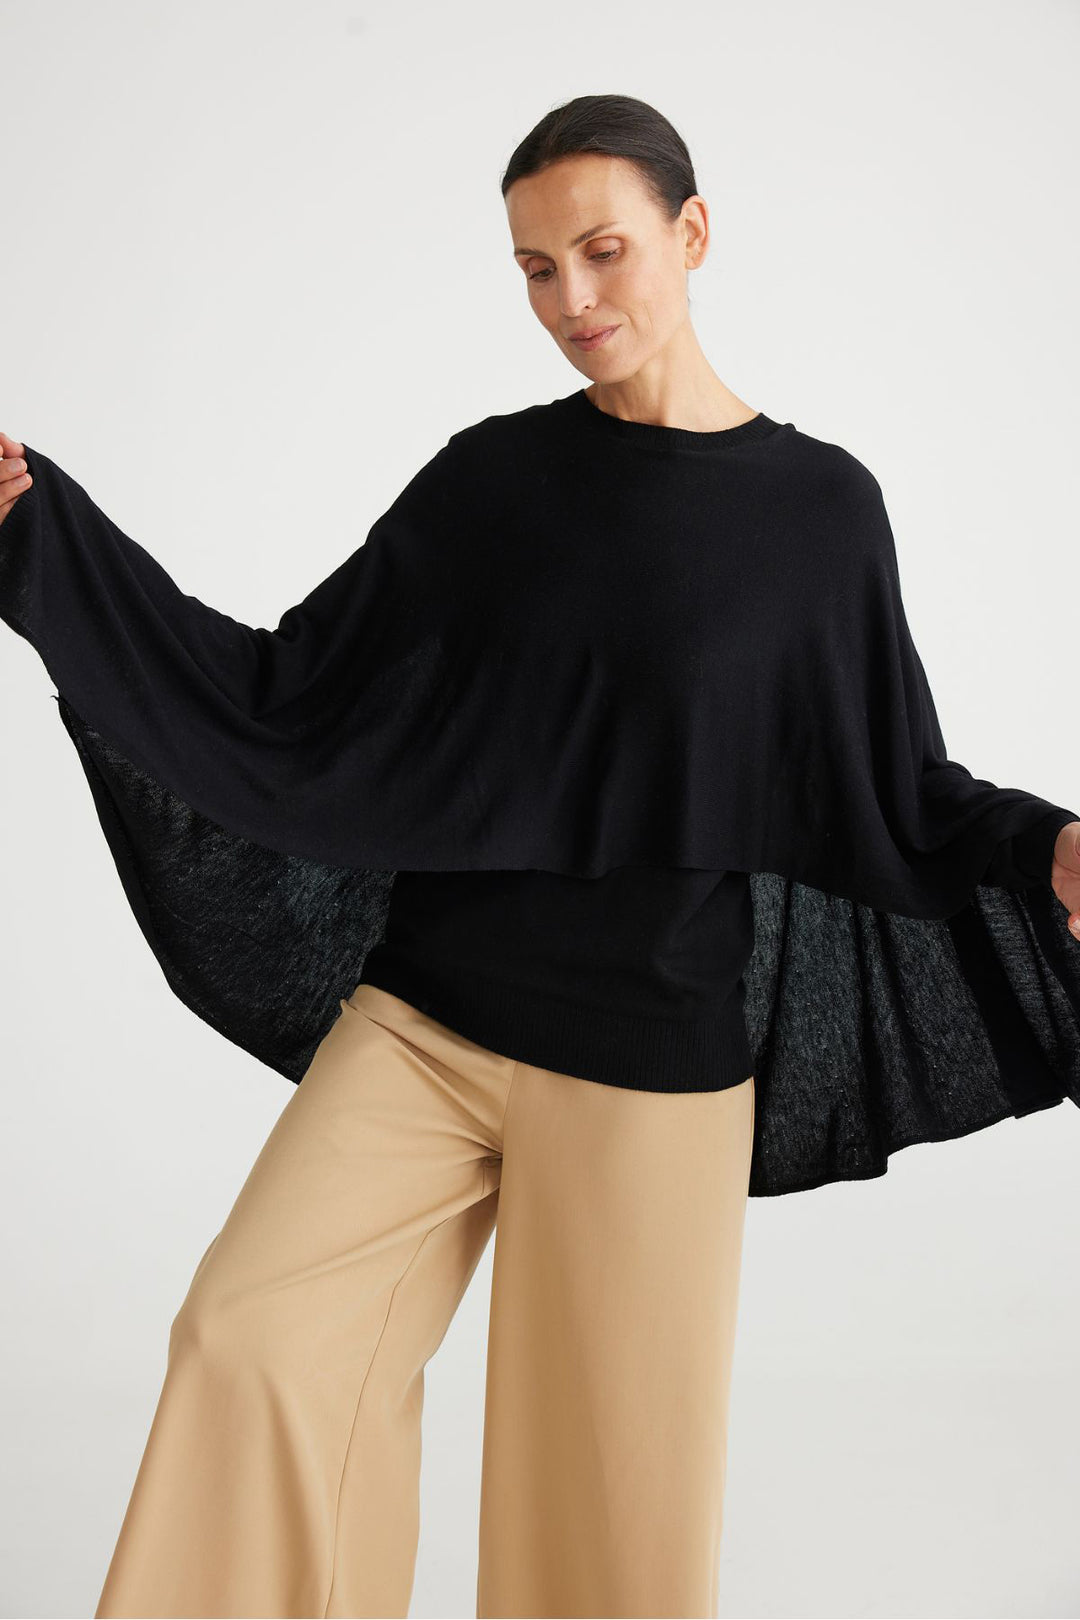 With the look of a poncho this long sleeve Juliette Knit by Brave & True is both comfortable and playful. Ultra soft with a layered look, this is a must have knit this season.  Brand : Brave & True Style Code : BT6660-1 Fabric : 54% Polyester 20% Nylon 20% Acrylic 6% Merino Wool Cold hand wash Long sleeve knit with cape poncho style detail Fine knitted soft yarn fabrication Ribbed cuff and hem Round neck Slim fit undergarment 'Every Woman' metallic tag at back neck